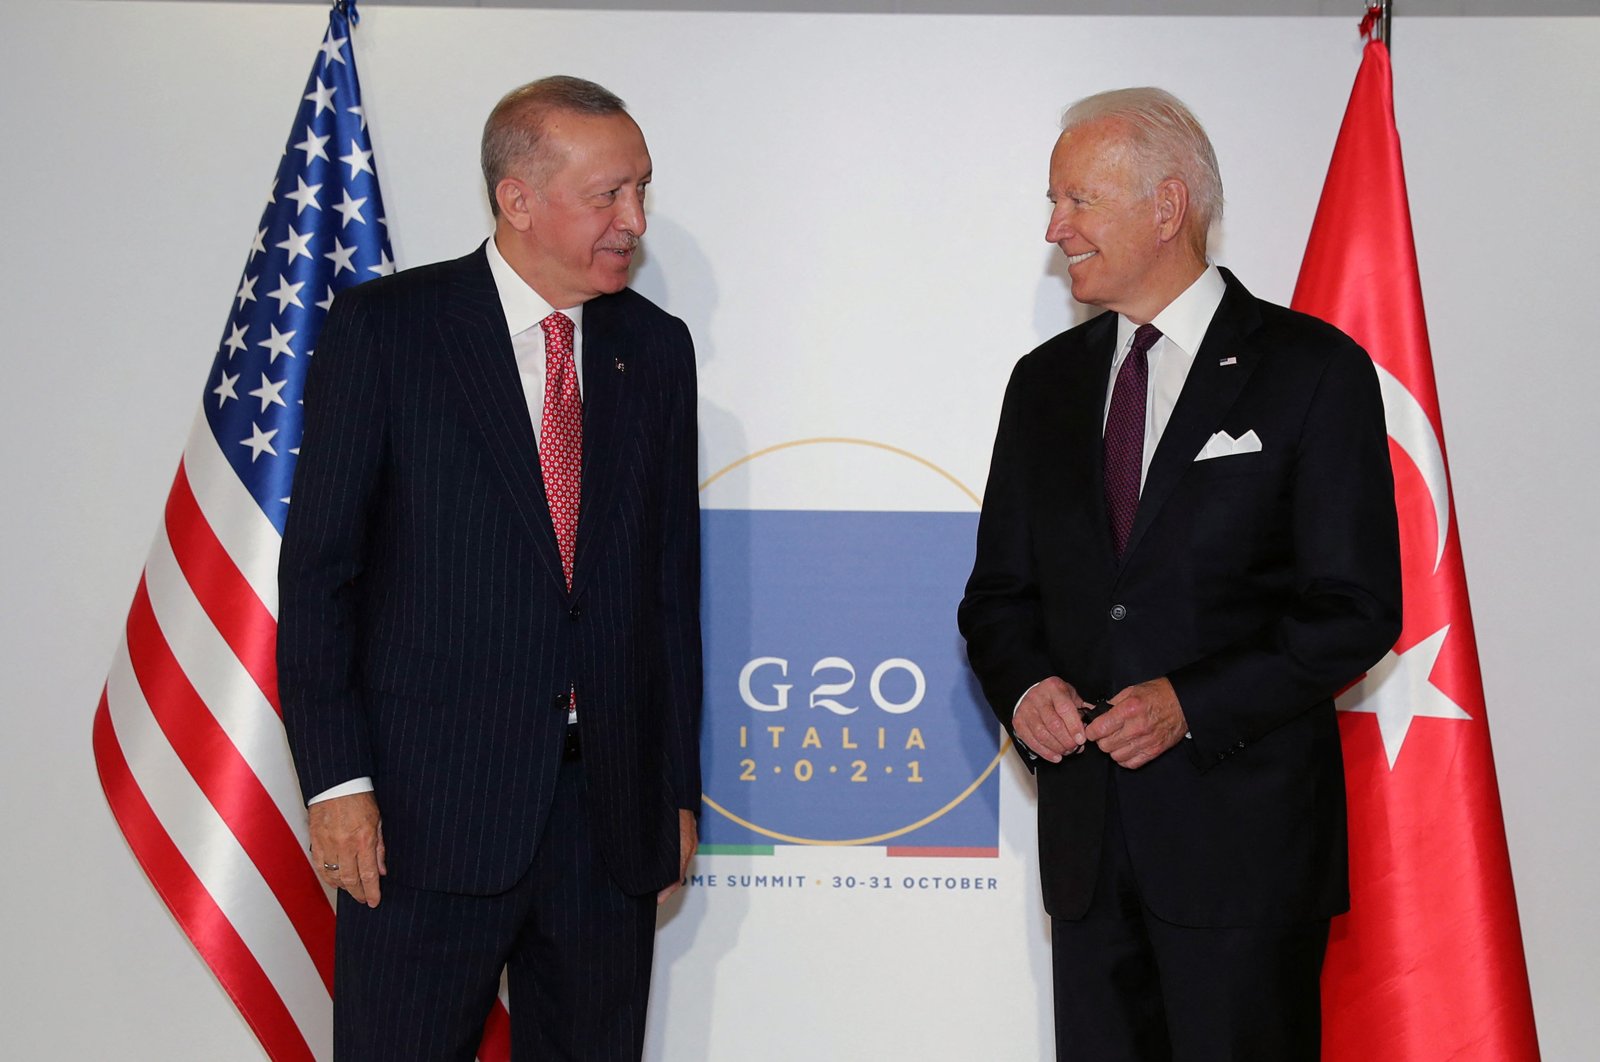 This handout photograph taken and released by the Turkish Presidential Press Service shows President Recep Tayyip Erdoğan (L) and U.S. President Joe Biden posing before their meeting during the G-20 Summit at the Roma Convention Center La Nuvola, Italy, Oct. 31, 2021. (AFP File Photo)